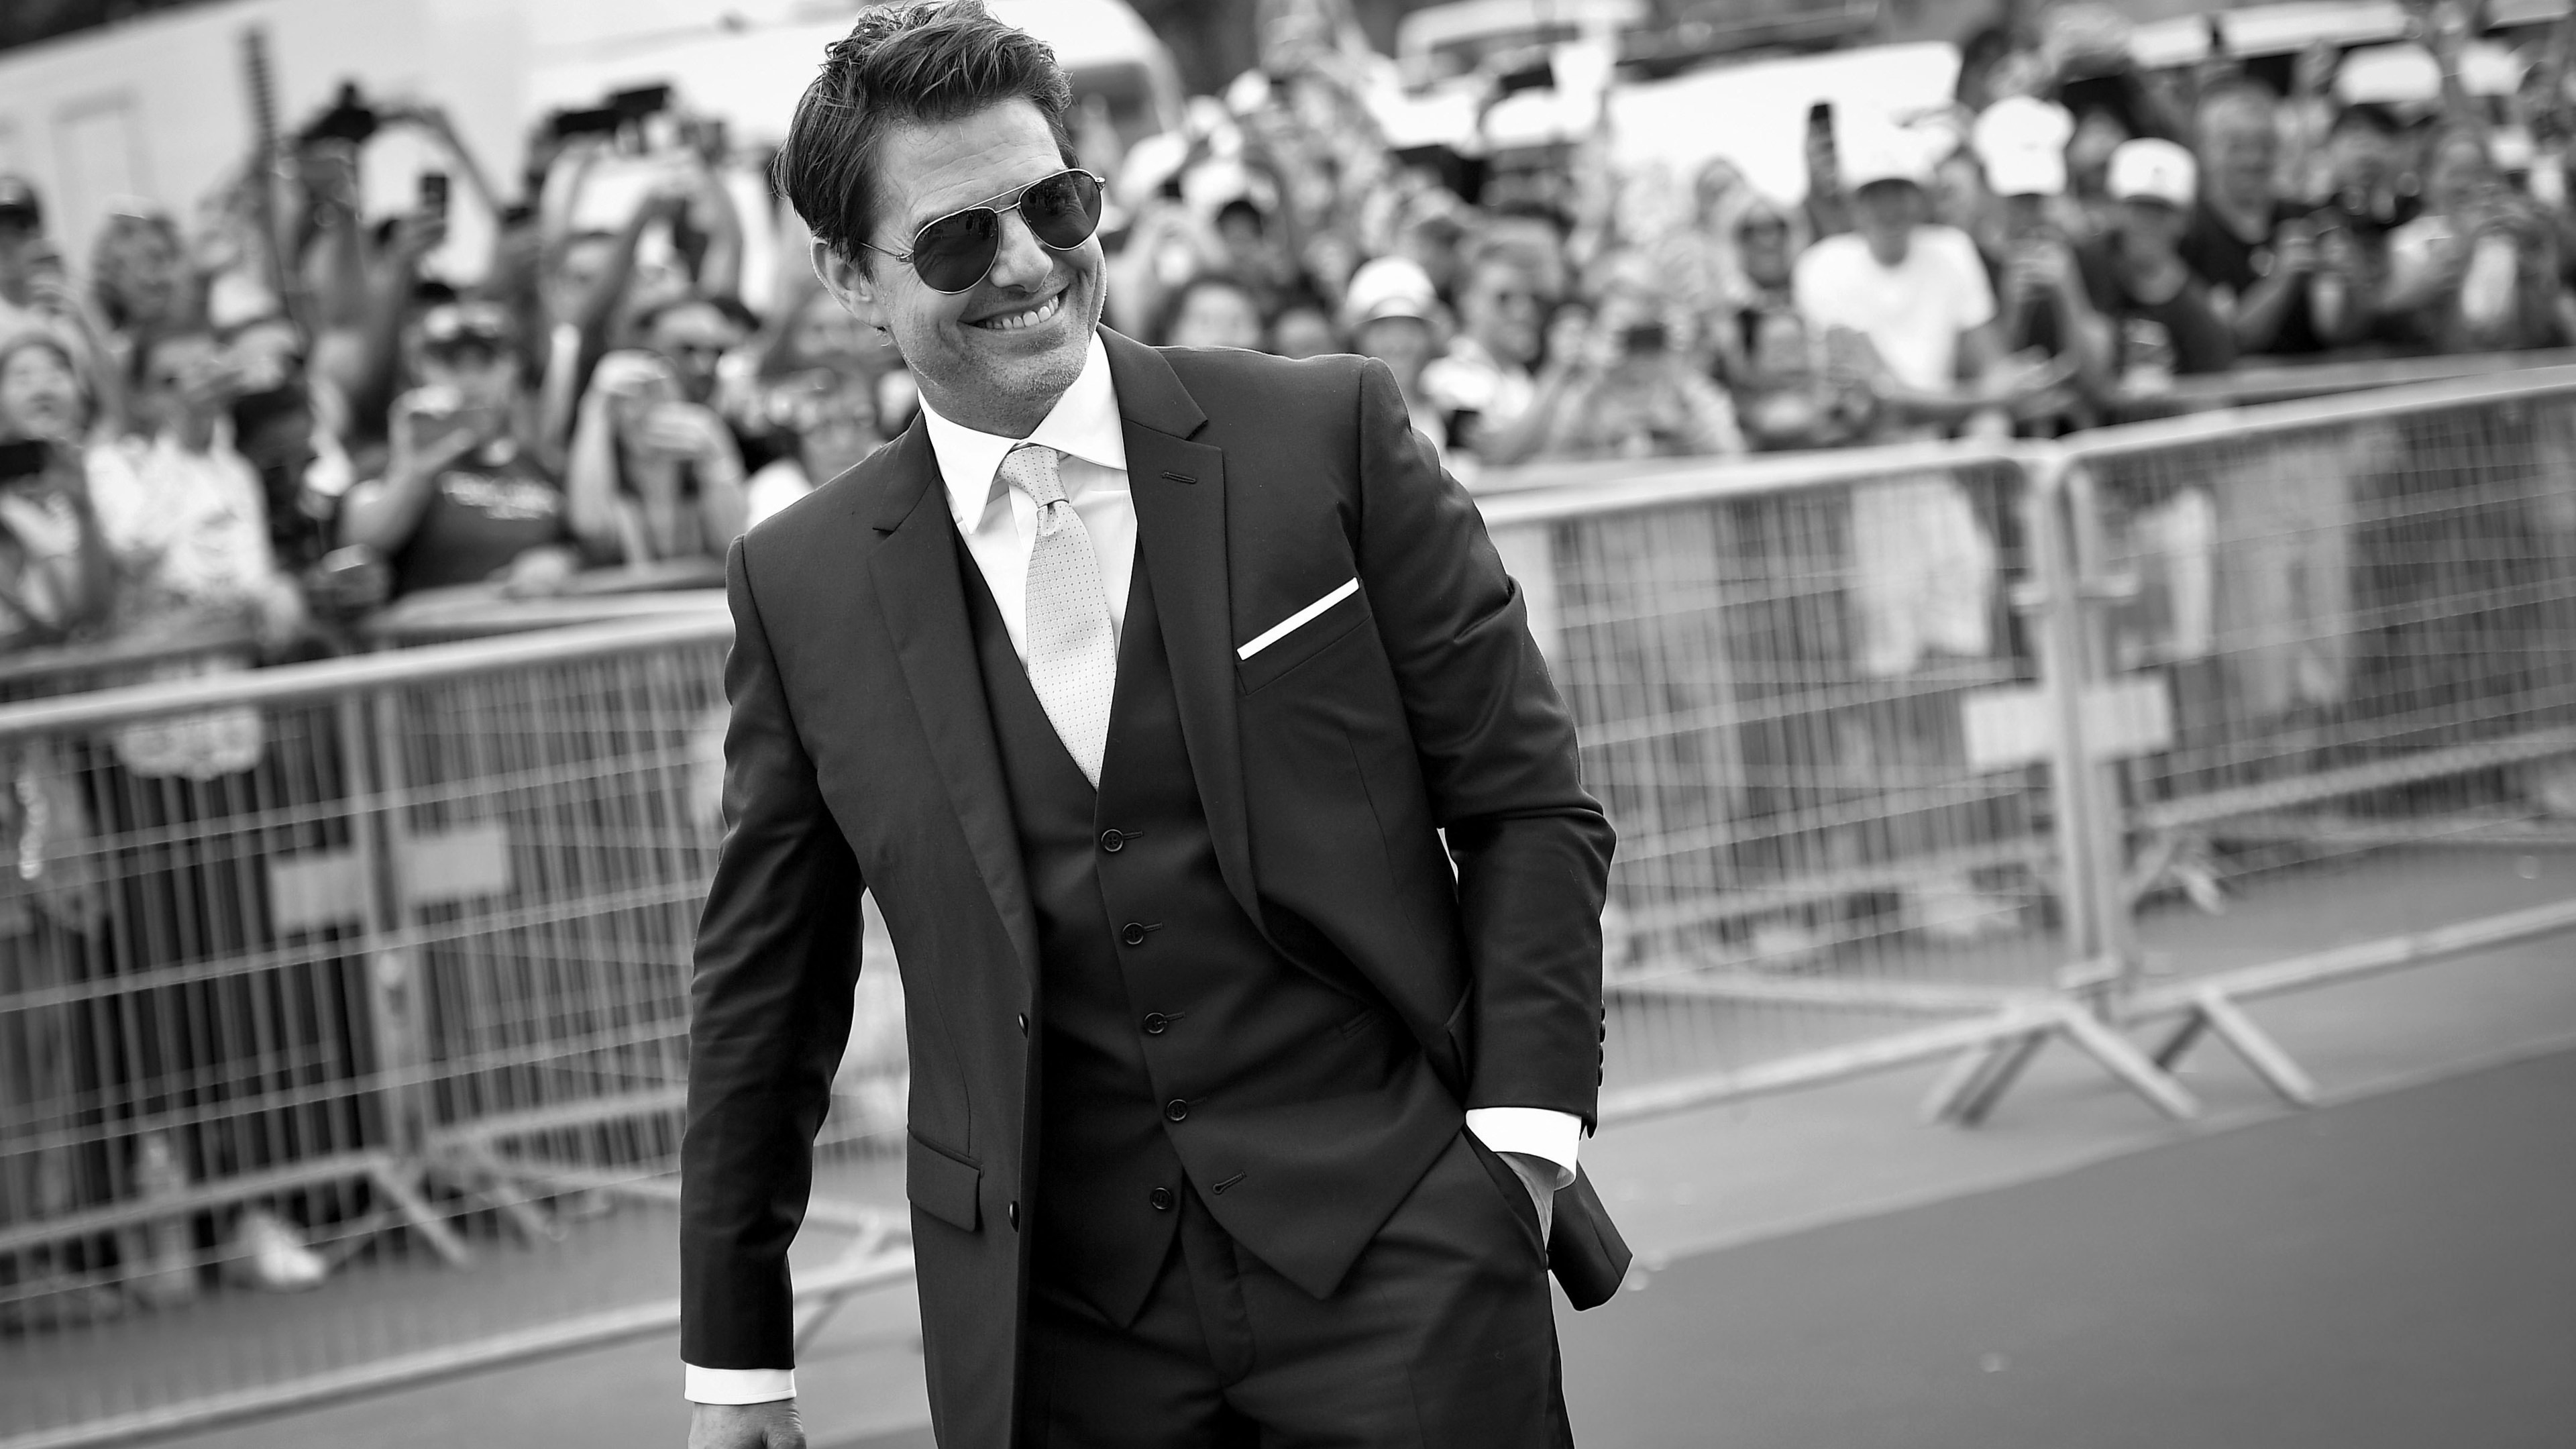 Tom Cruise wallpapers HD | Download Free backgrounds